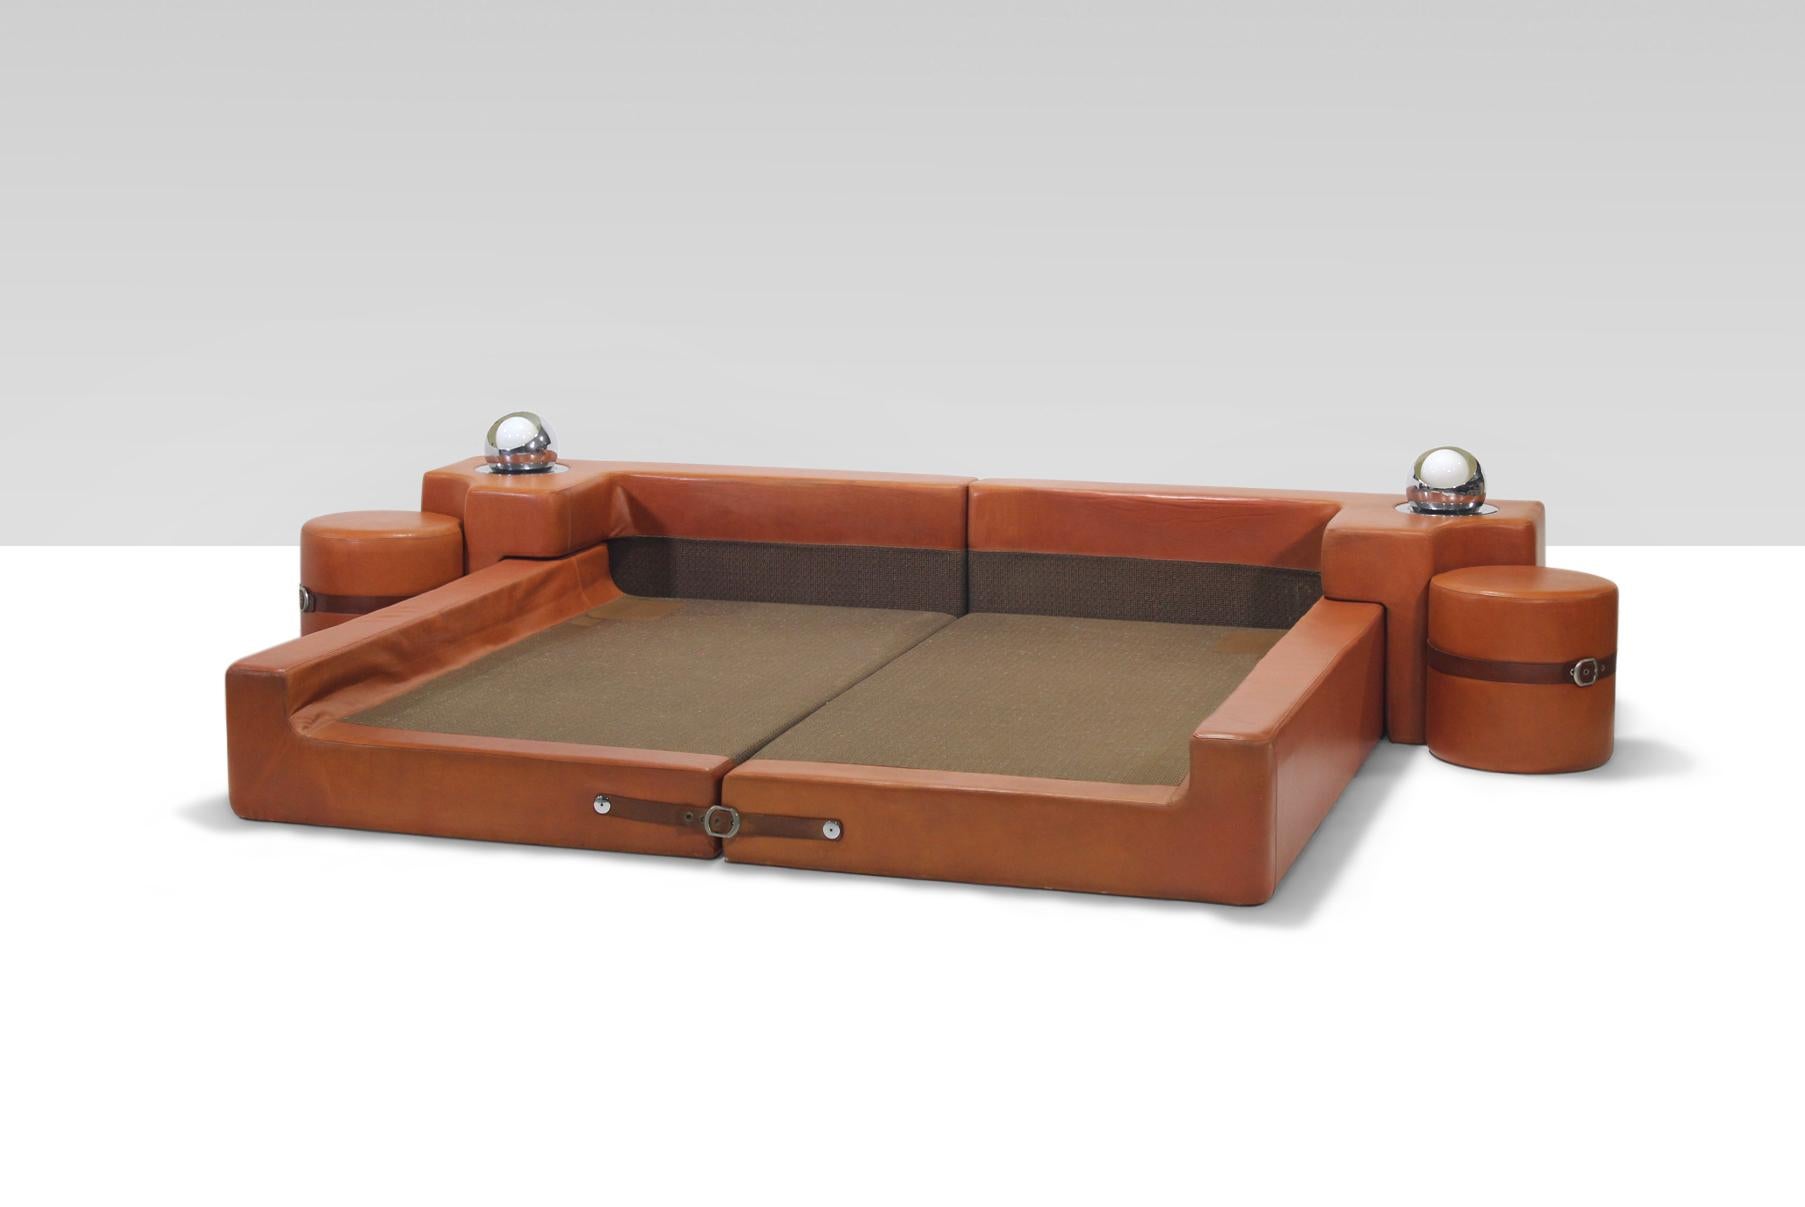 Cognac leather bed by Guido Faleschini for Mariani of Italy, circa 1975. This bed includes bed platform, headboard with built in reading lights, and round end tables/stools. The pieces of the bed are held together by leather belts and buckles. In